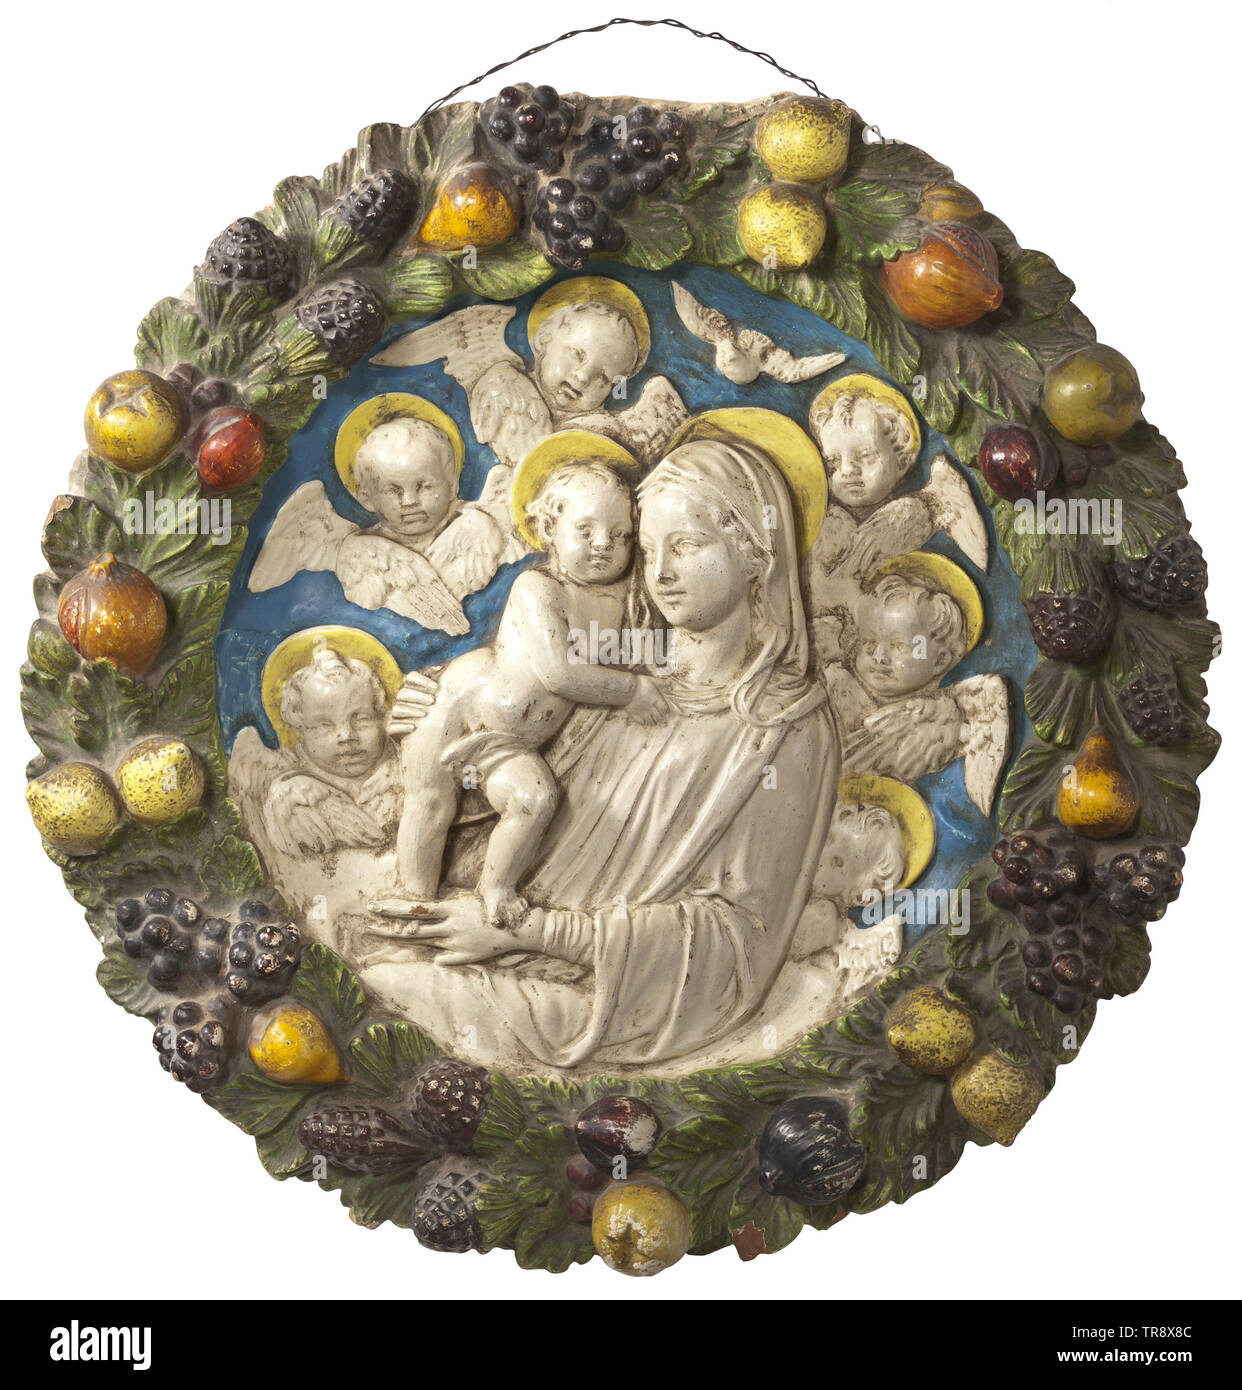 A large Italian relief tondo in the style of Andrea della Robbia, circa 1900 Reddish clay with polychrome cold painting. In the centre a Virgin Mary in high relief, rendered in white, with the standing boy Jesus surrounded by winged angels' heads on blue ground. The edge with a polychrome leaf and fruit bouquet in relief. Minimal damages and colour chippings. Diameter 64 cm. historic, historical, handicrafts, handcraft, craft, object, objects, stills, clipping, clippings, cut out, cut-out, cut-outs, 20th century, Additional-Rights-Clearance-Info-Not-Available Stock Photo